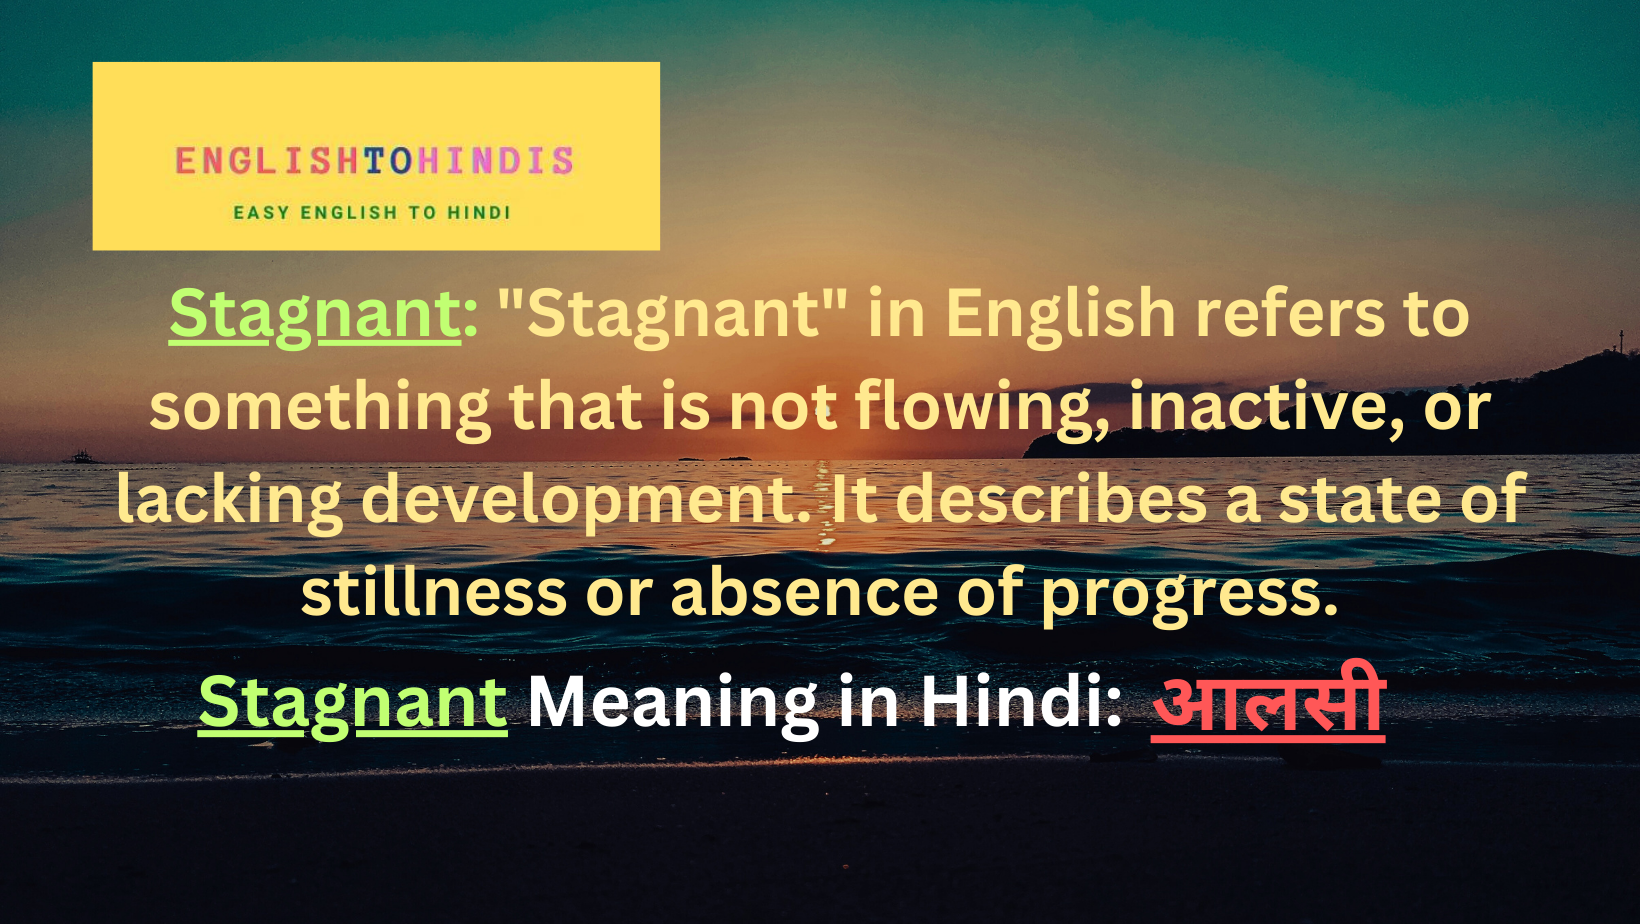 Stagnant meaning in Hindi